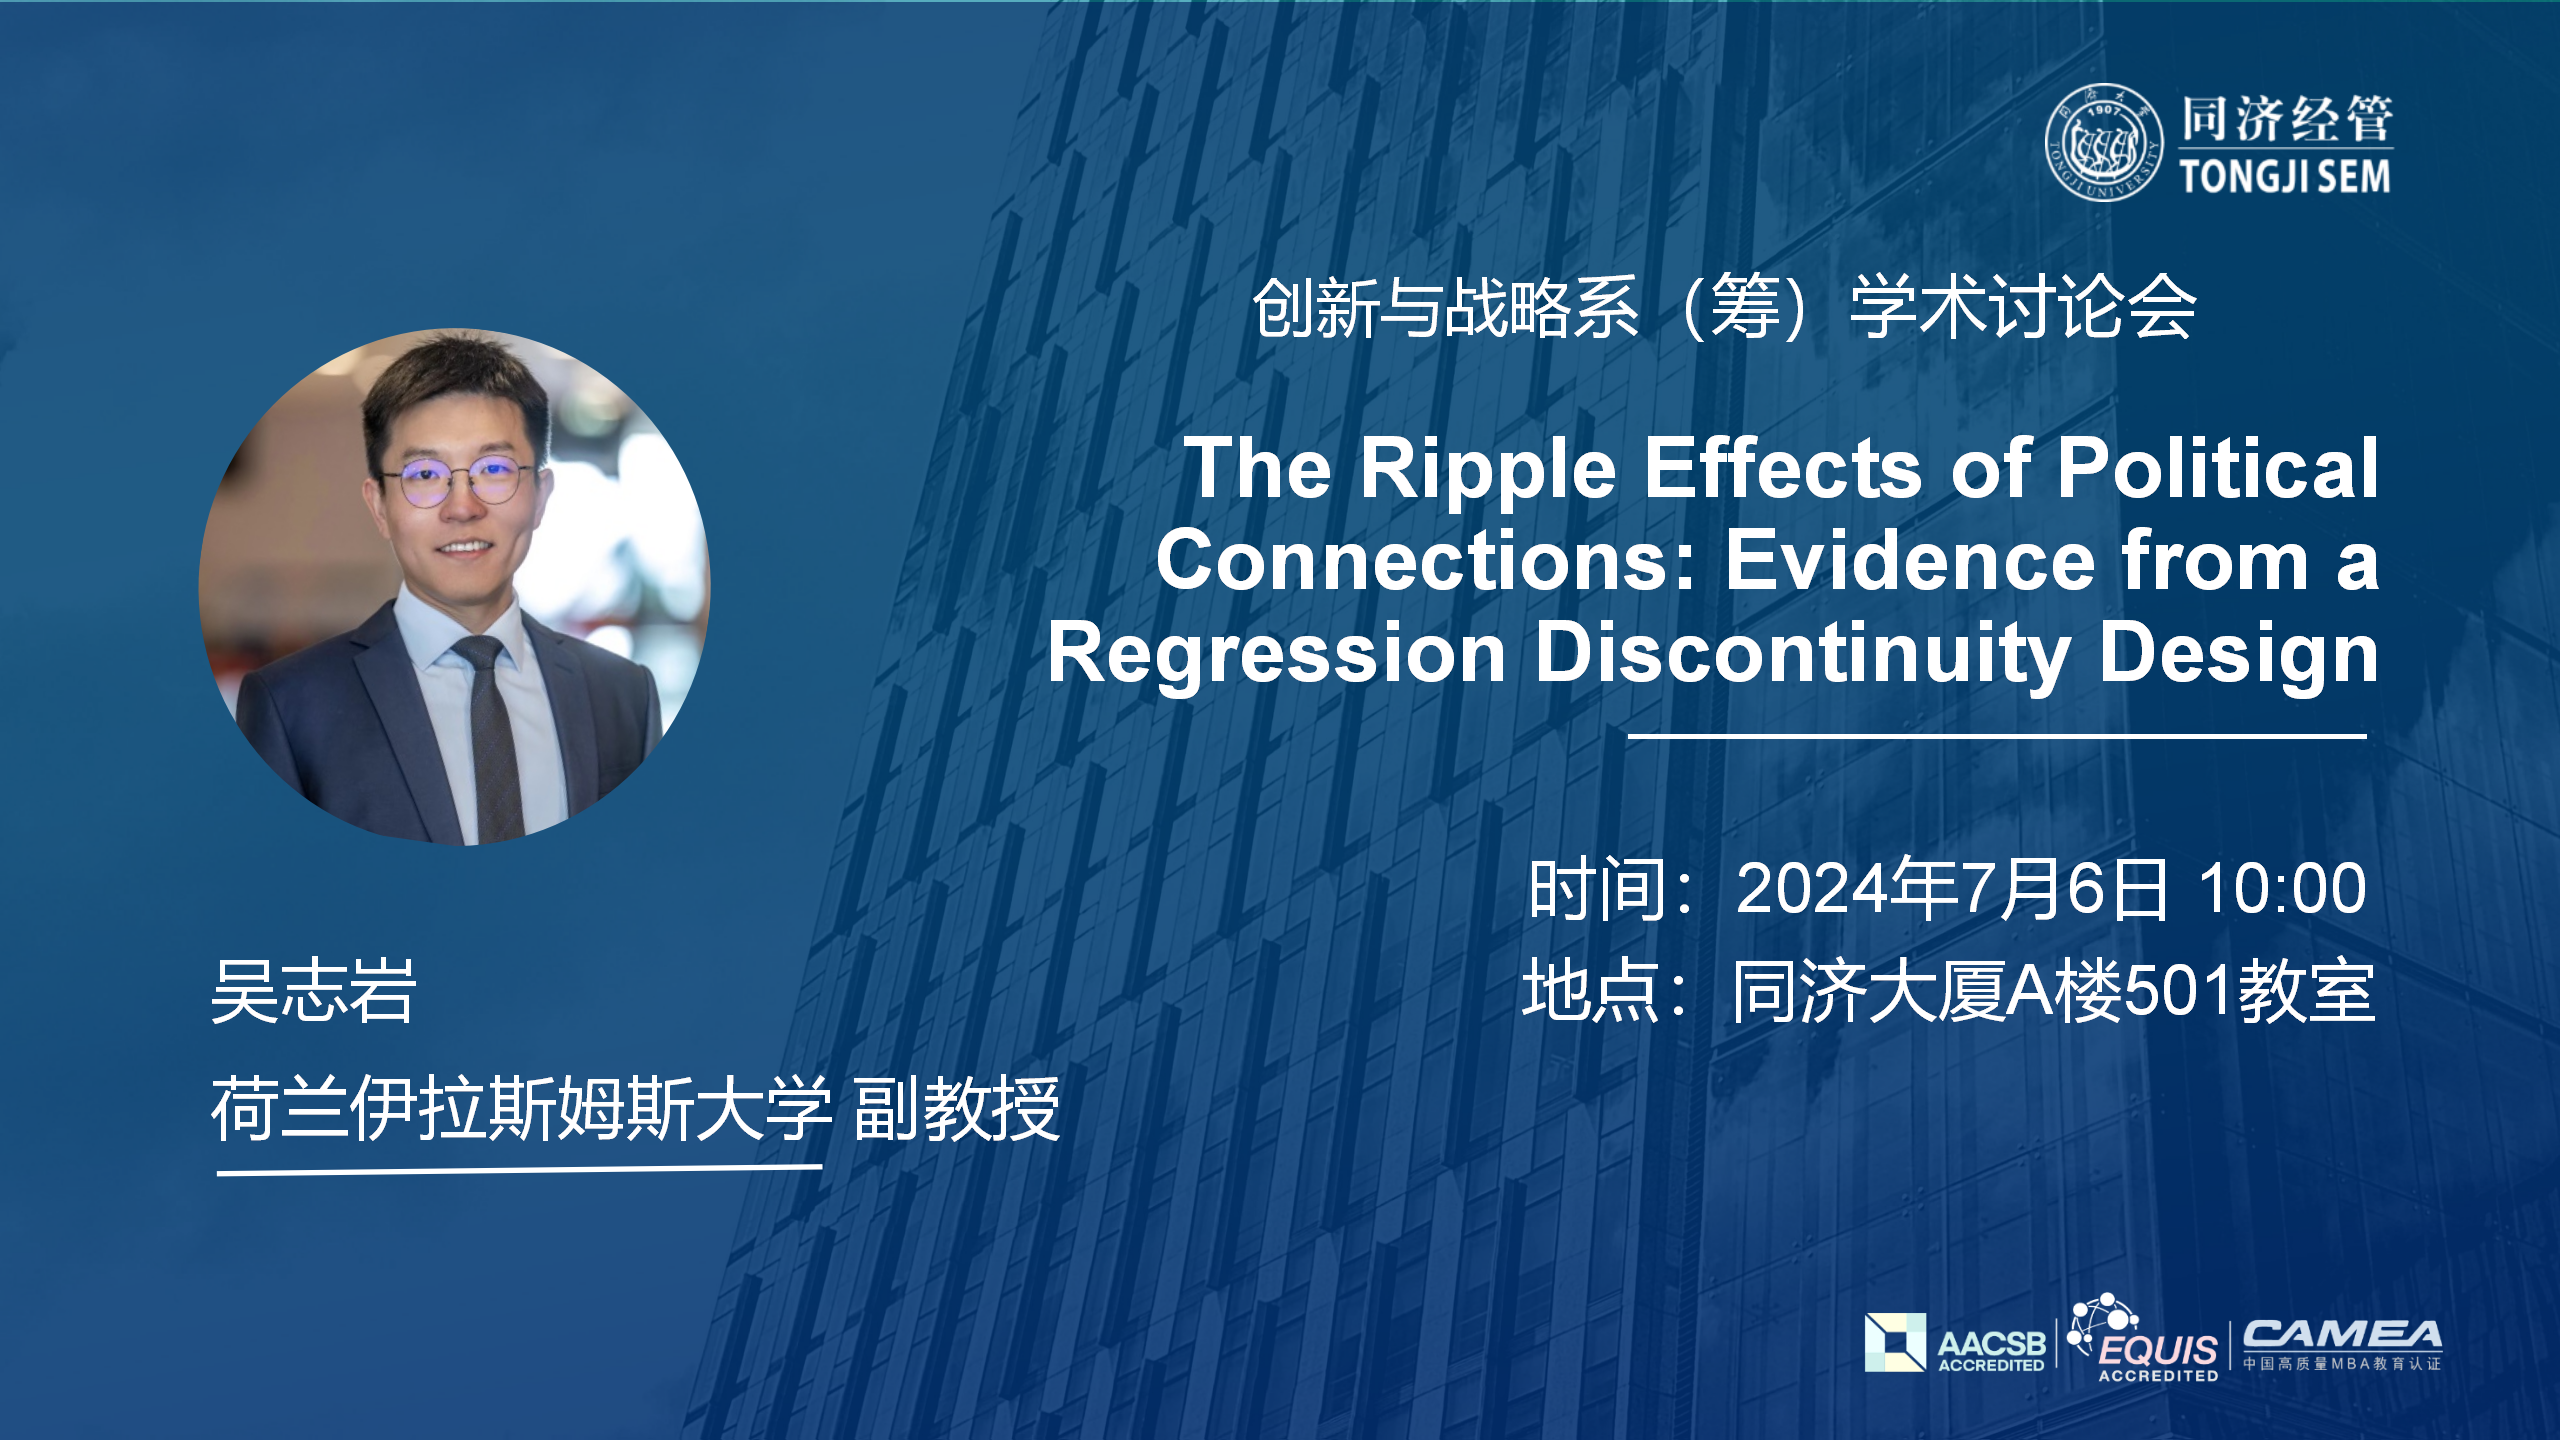 The Ripple Effects of Political Connections: Evidence from a Regression Discontinuity Design